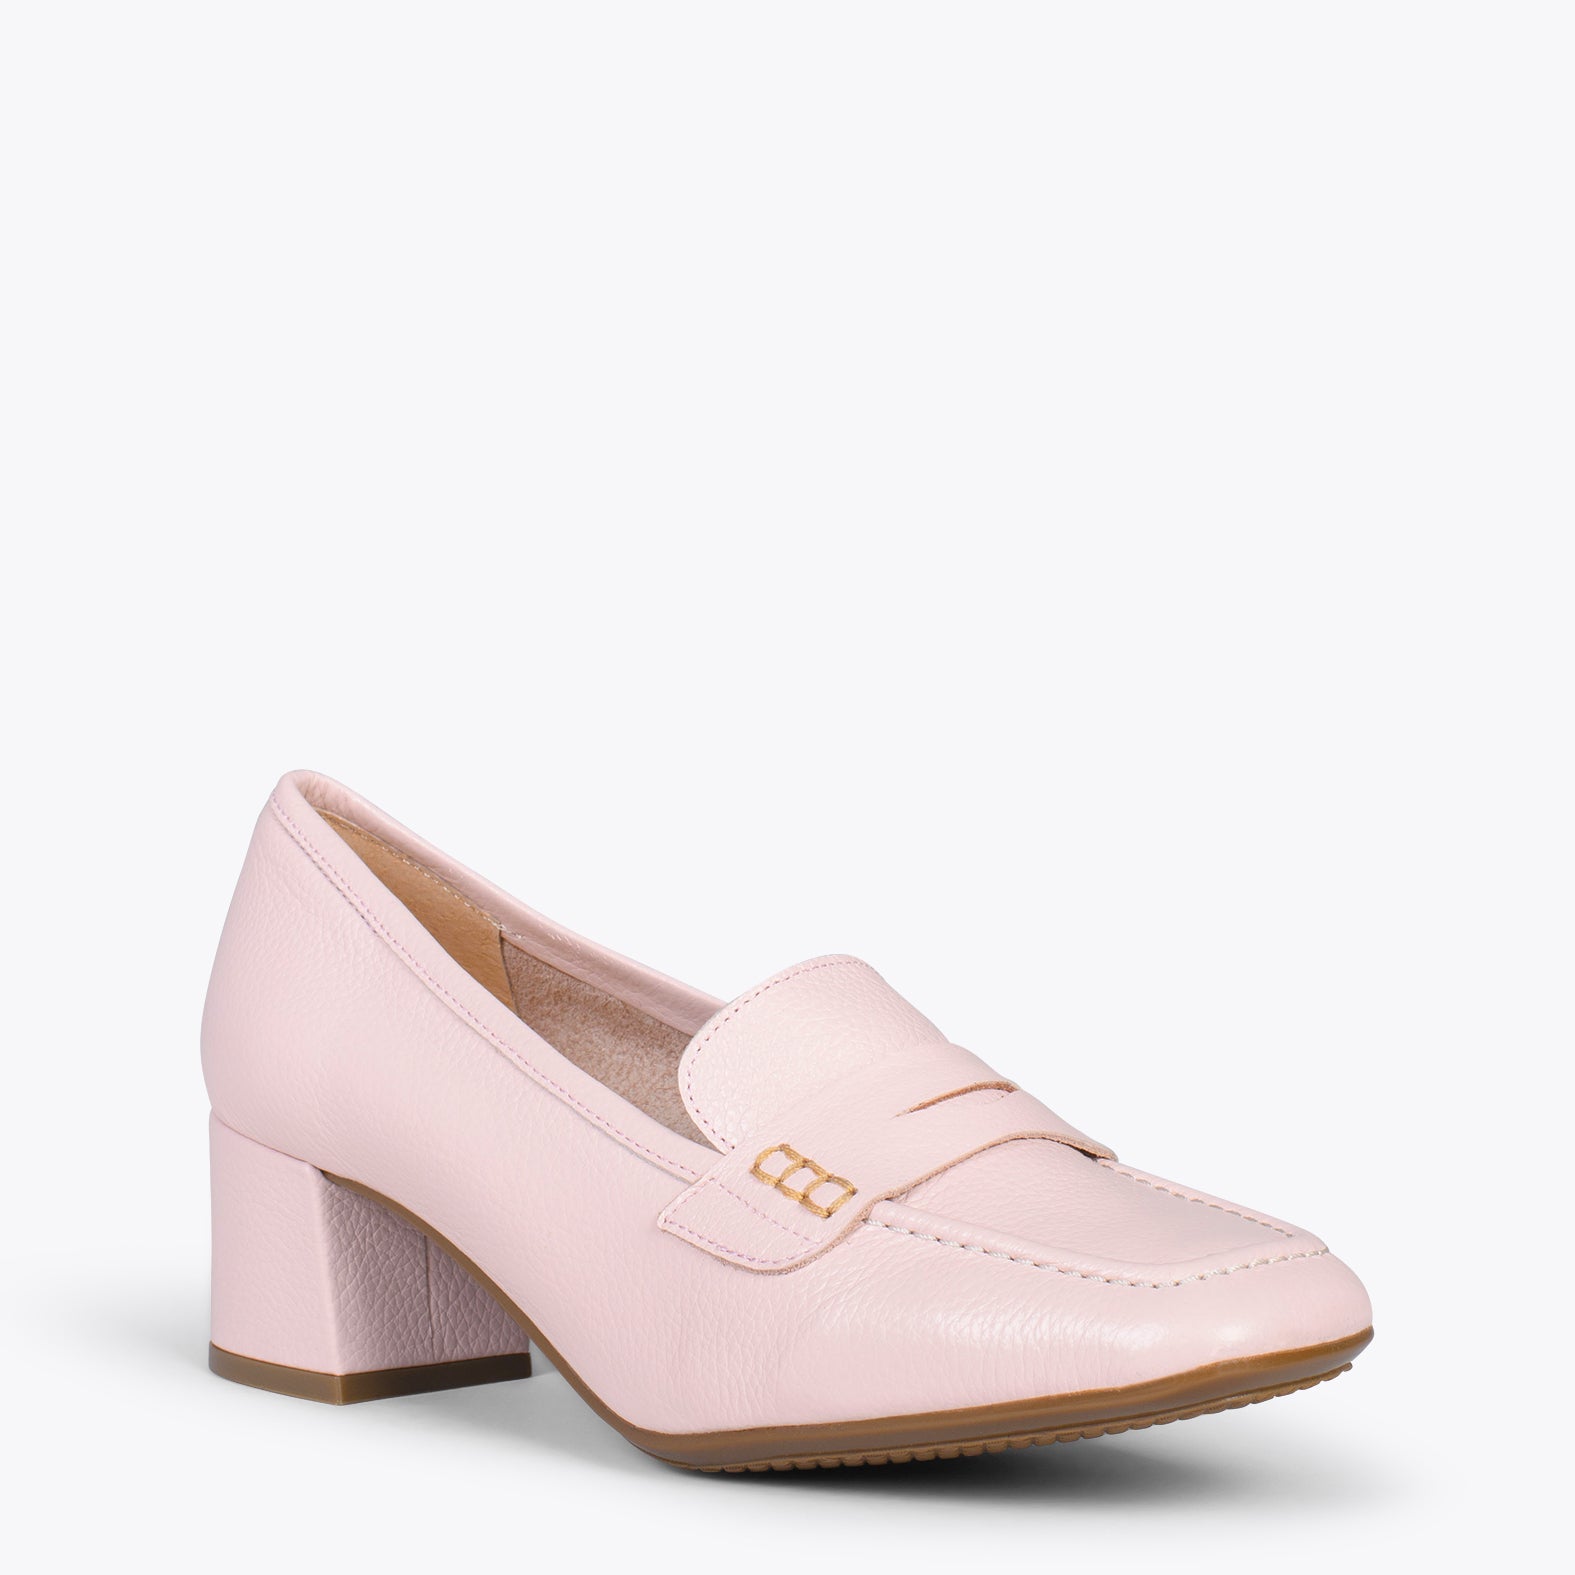 MASK HEEL - PINK women's loafers with heel and mask